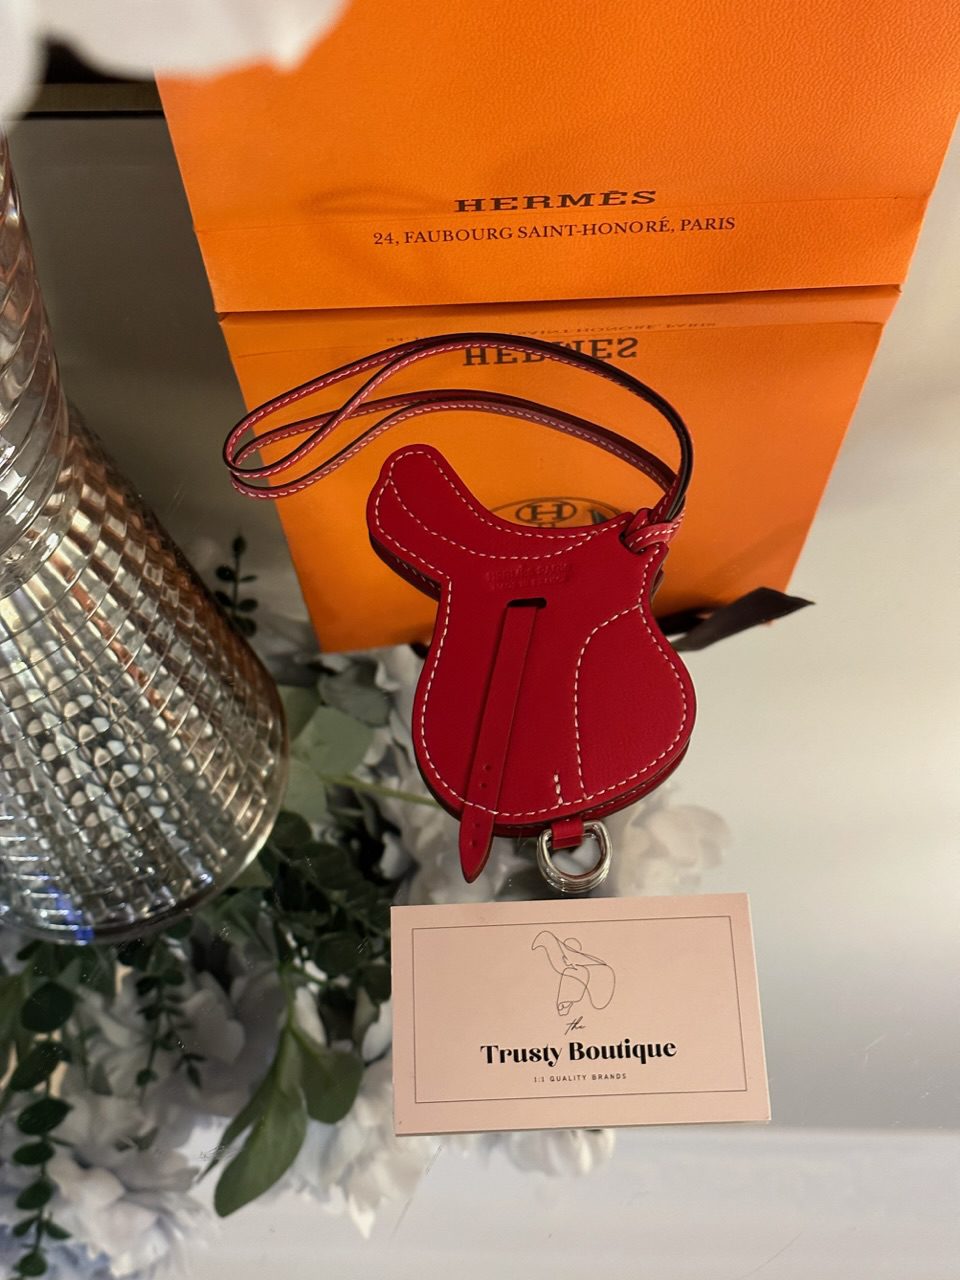 Hermès Paddock selle Red leather bag charm – Trusty